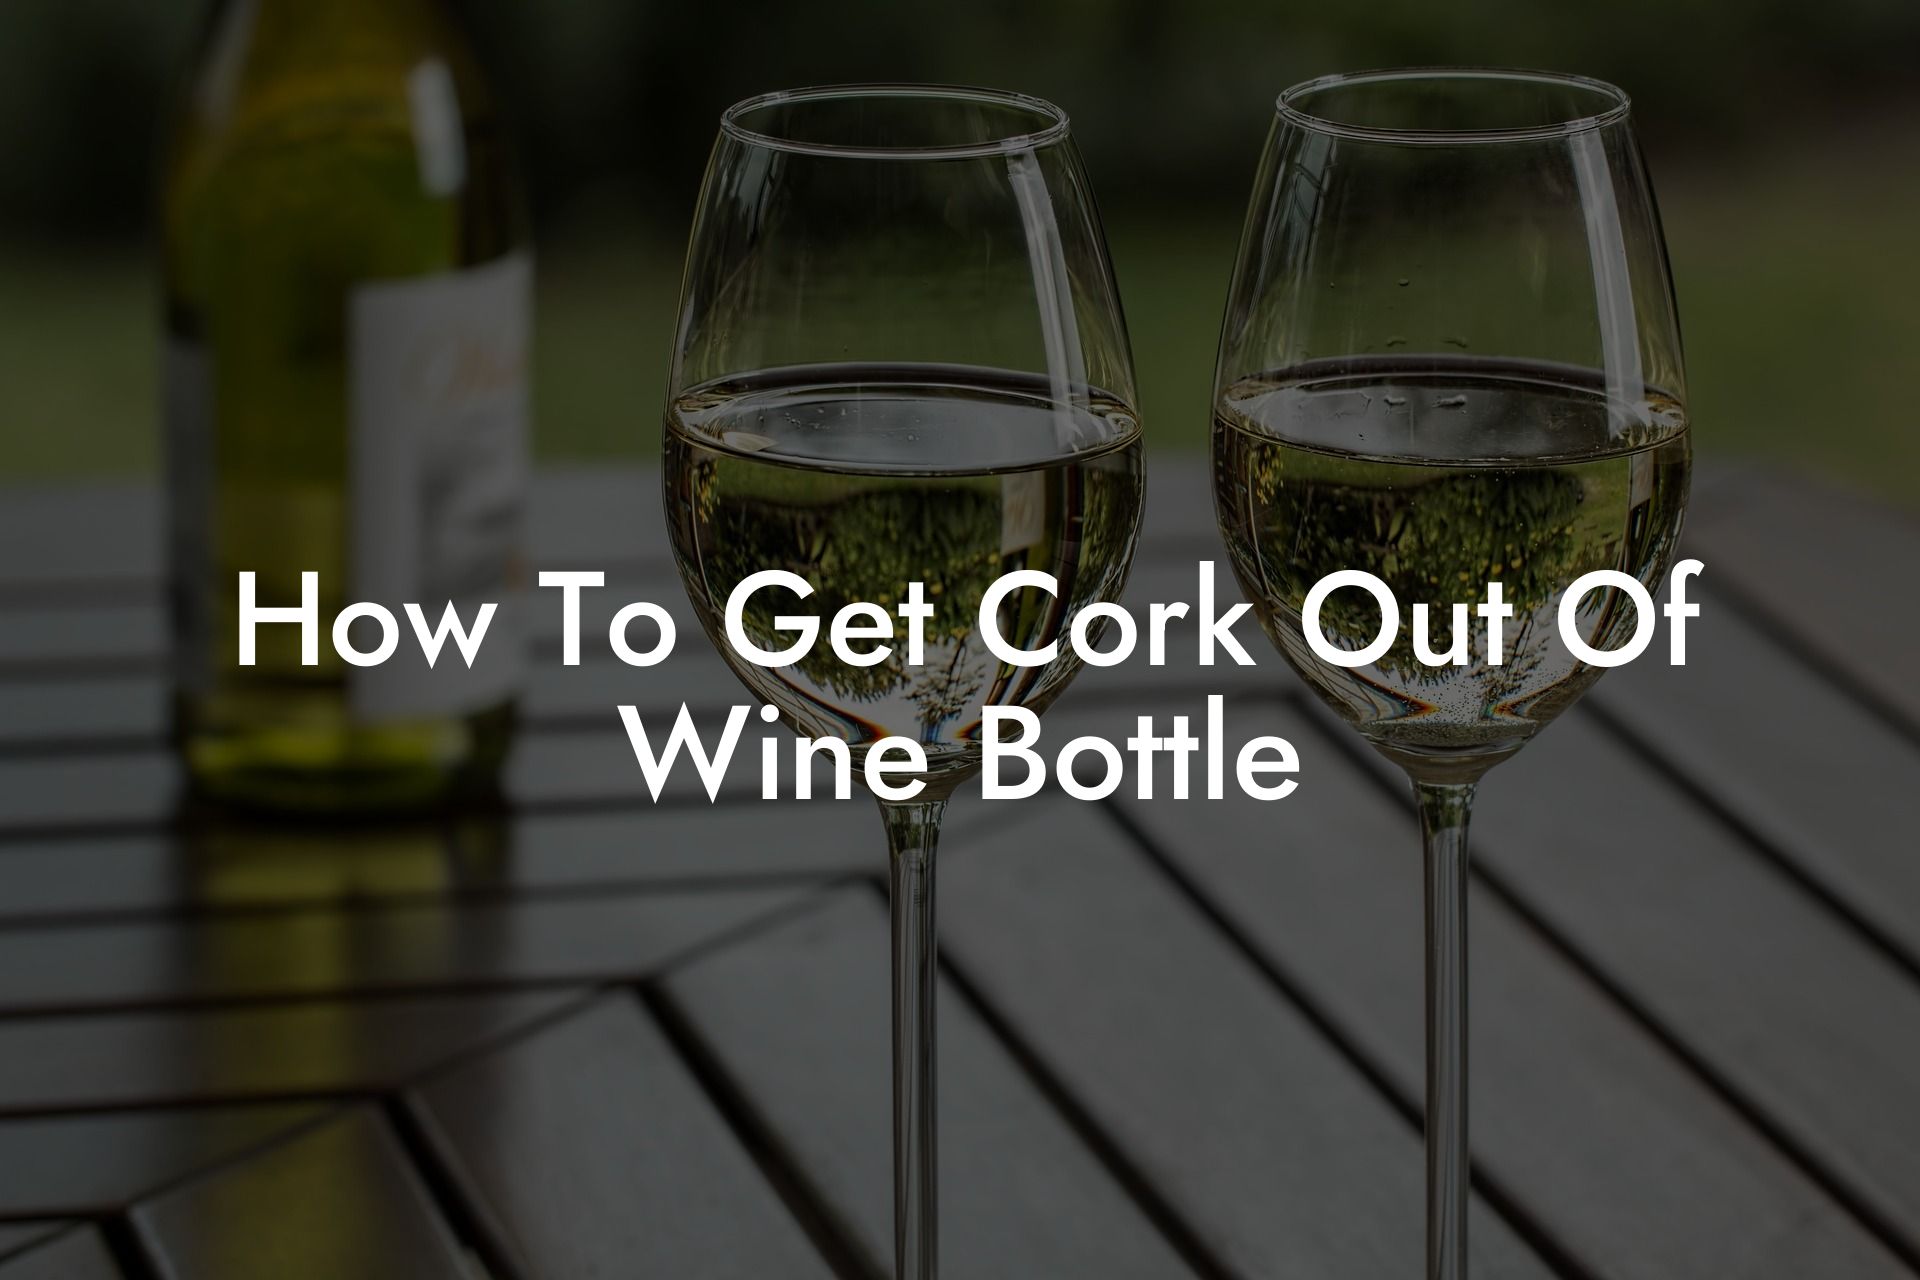 How To Get Cork Out Of Wine Bottle